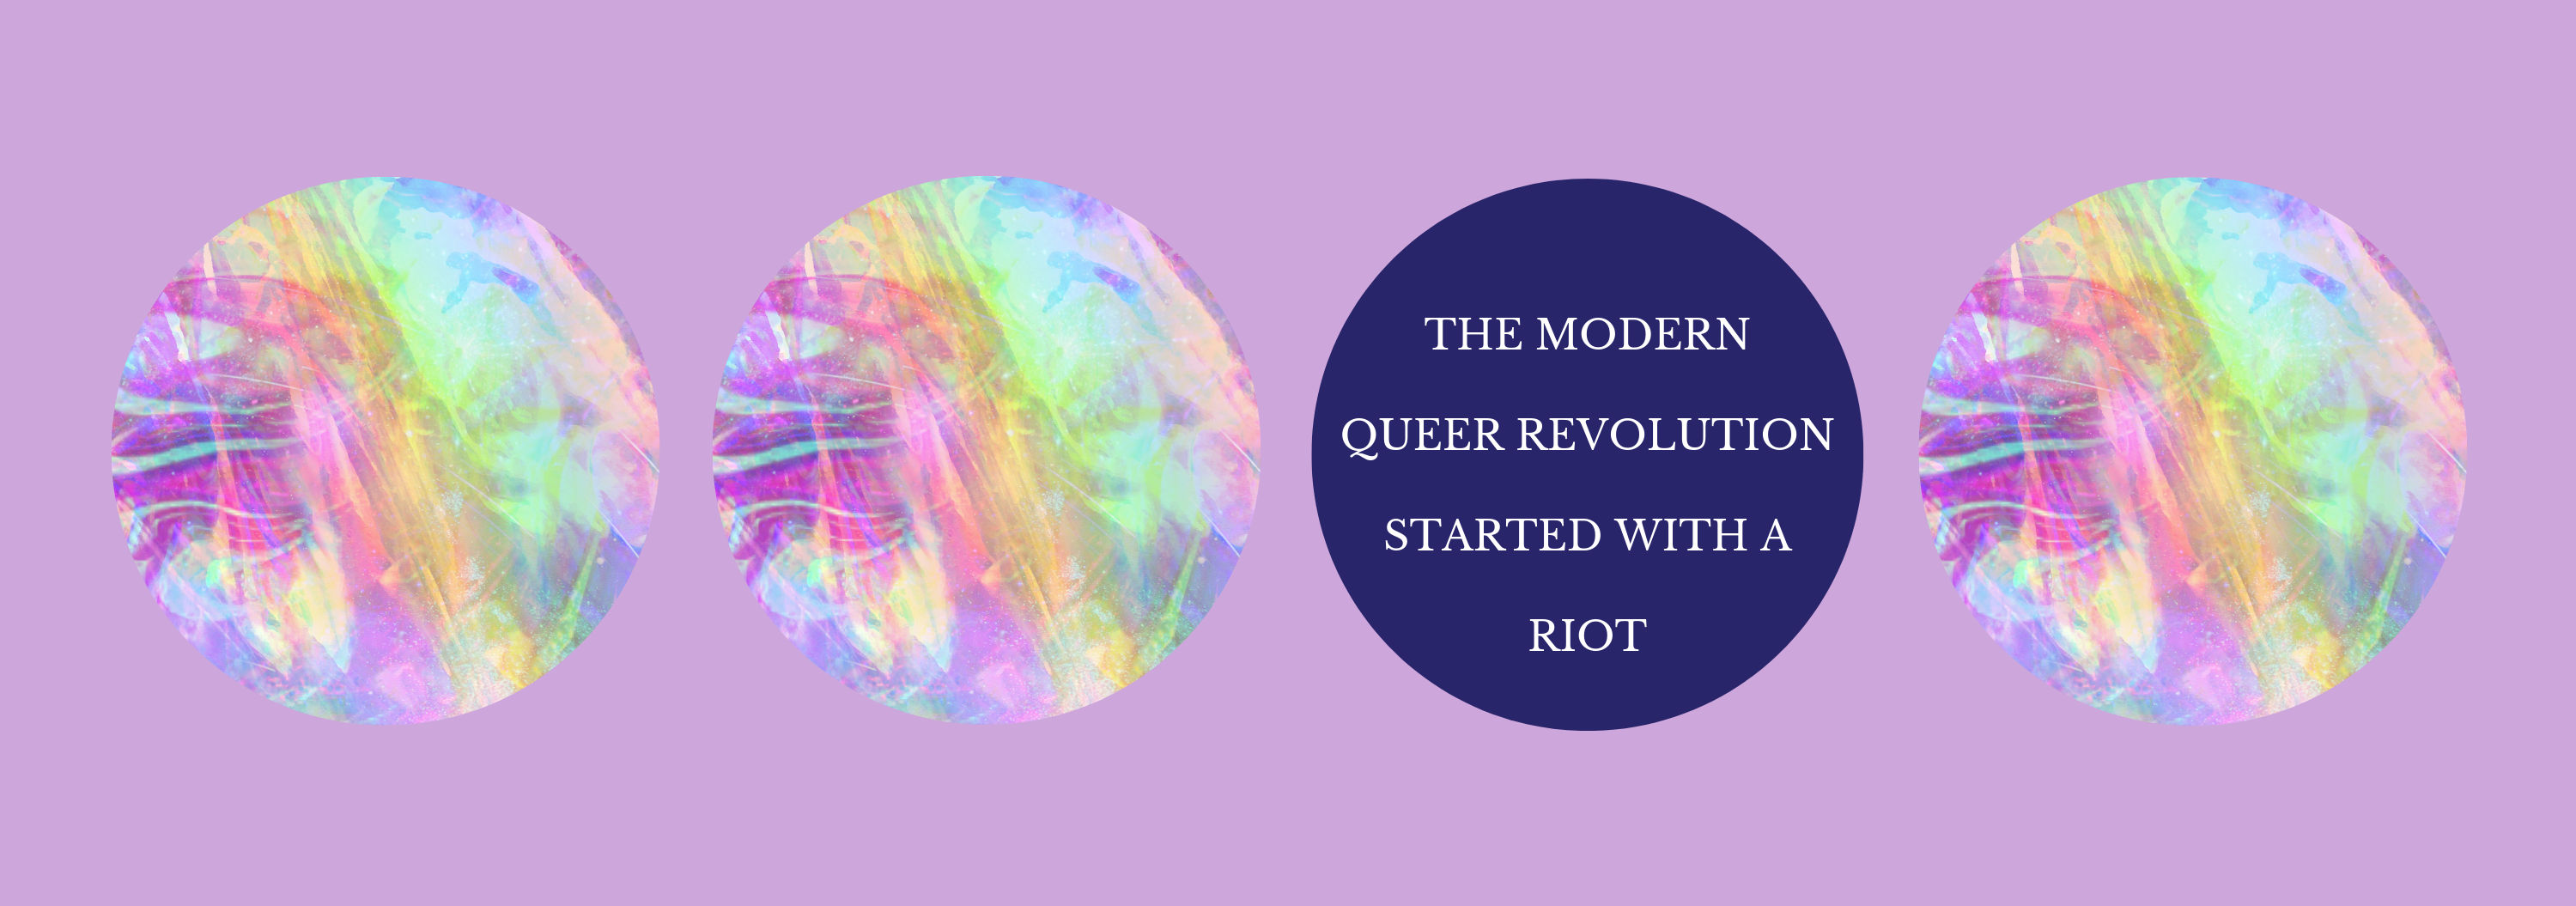 The modern queer revolution.png